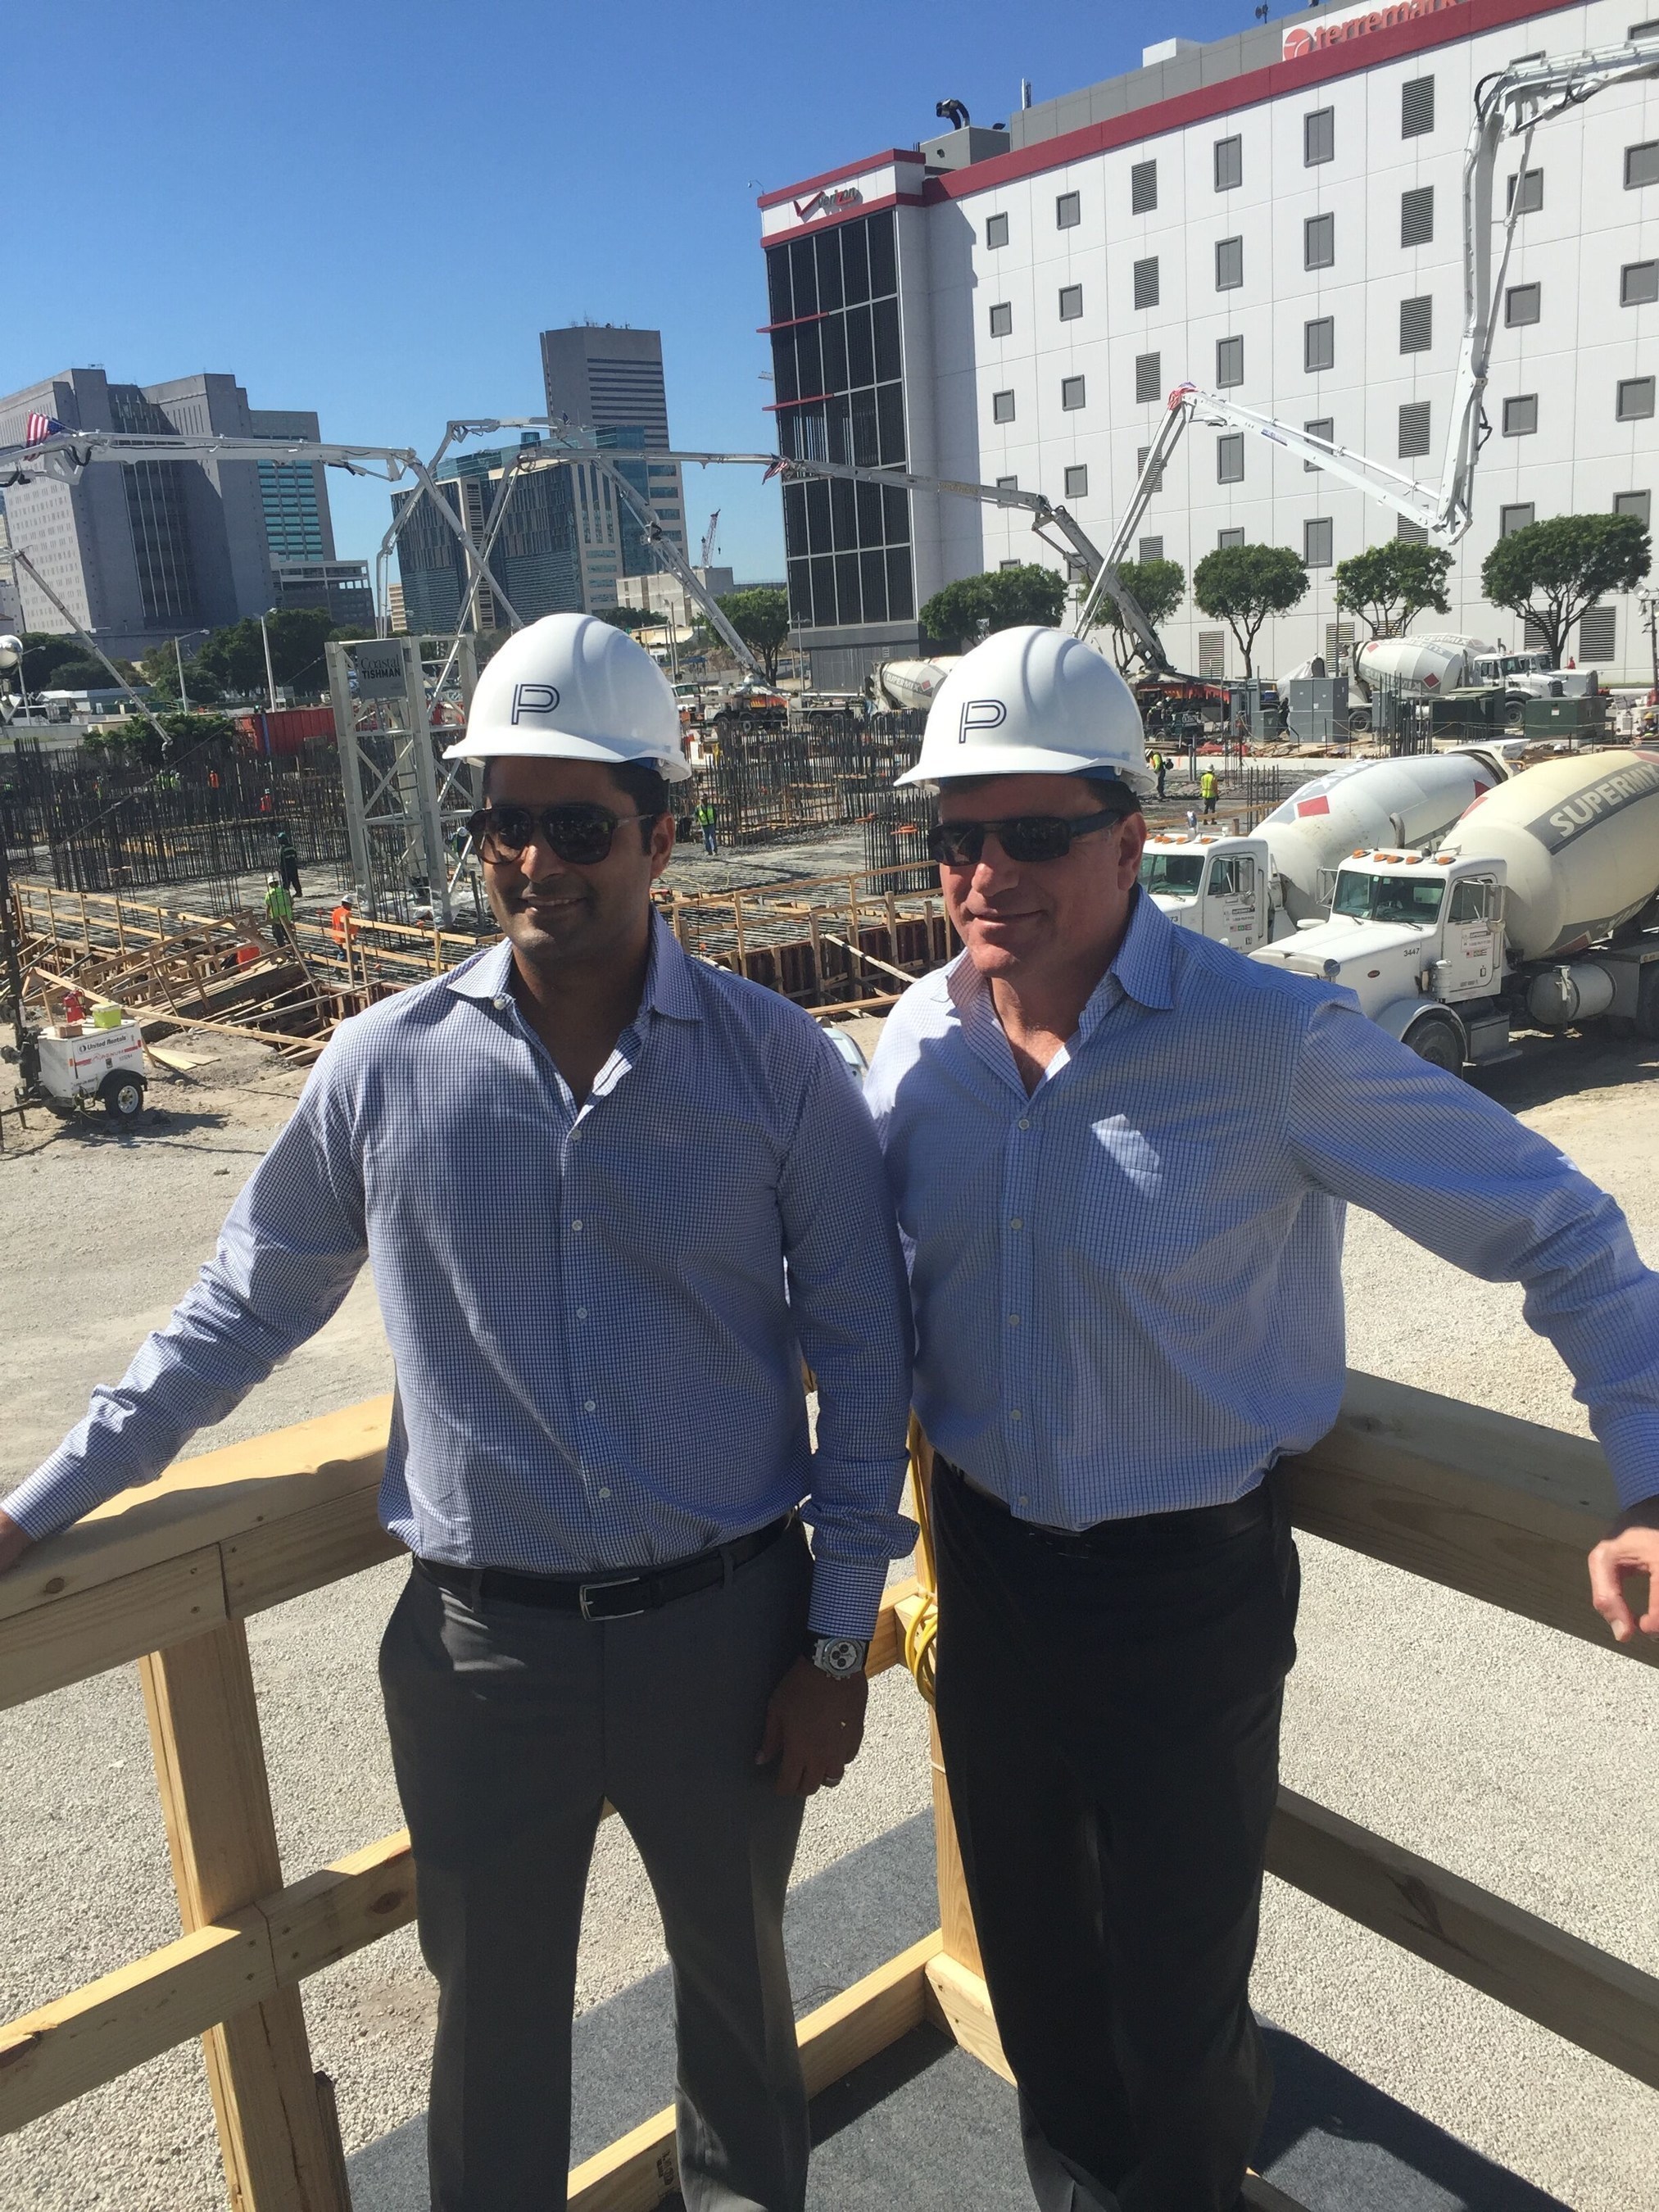 Nitin Motwani, Managing Principal, Miami Worldcenter (LEFT) and Daniel Kodsi, Paramount Miami Worldcenter (RIGHT) with "Big Pour" Foundation in Background